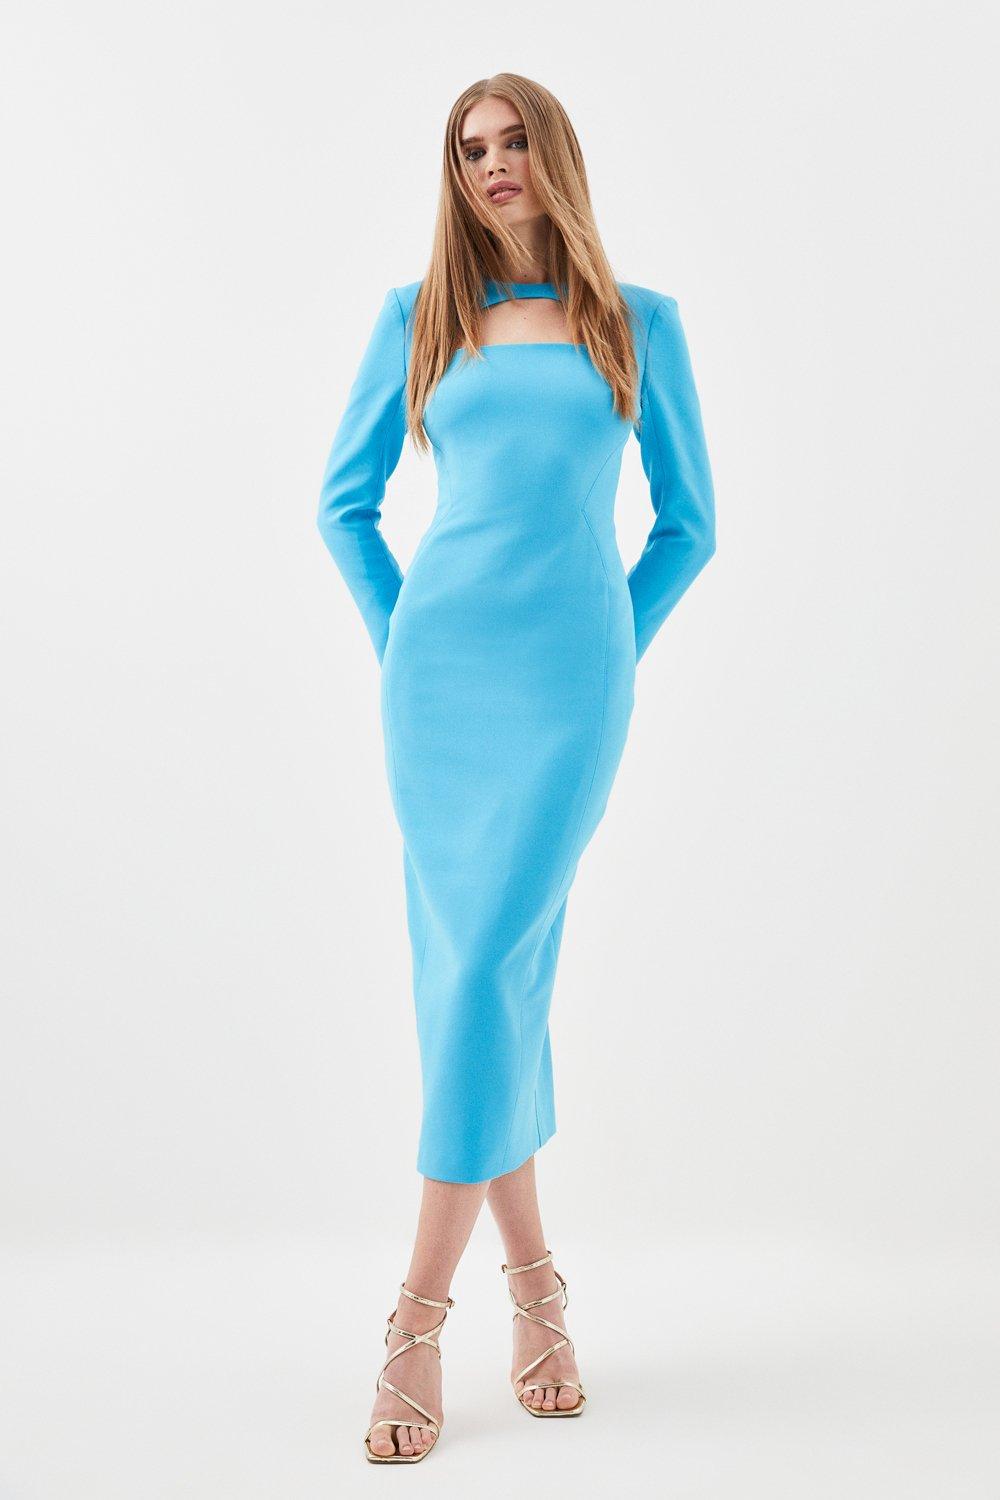 Tall Compact Stretch Cut Out Sleeved Tailored Pencil Dress - Aqua